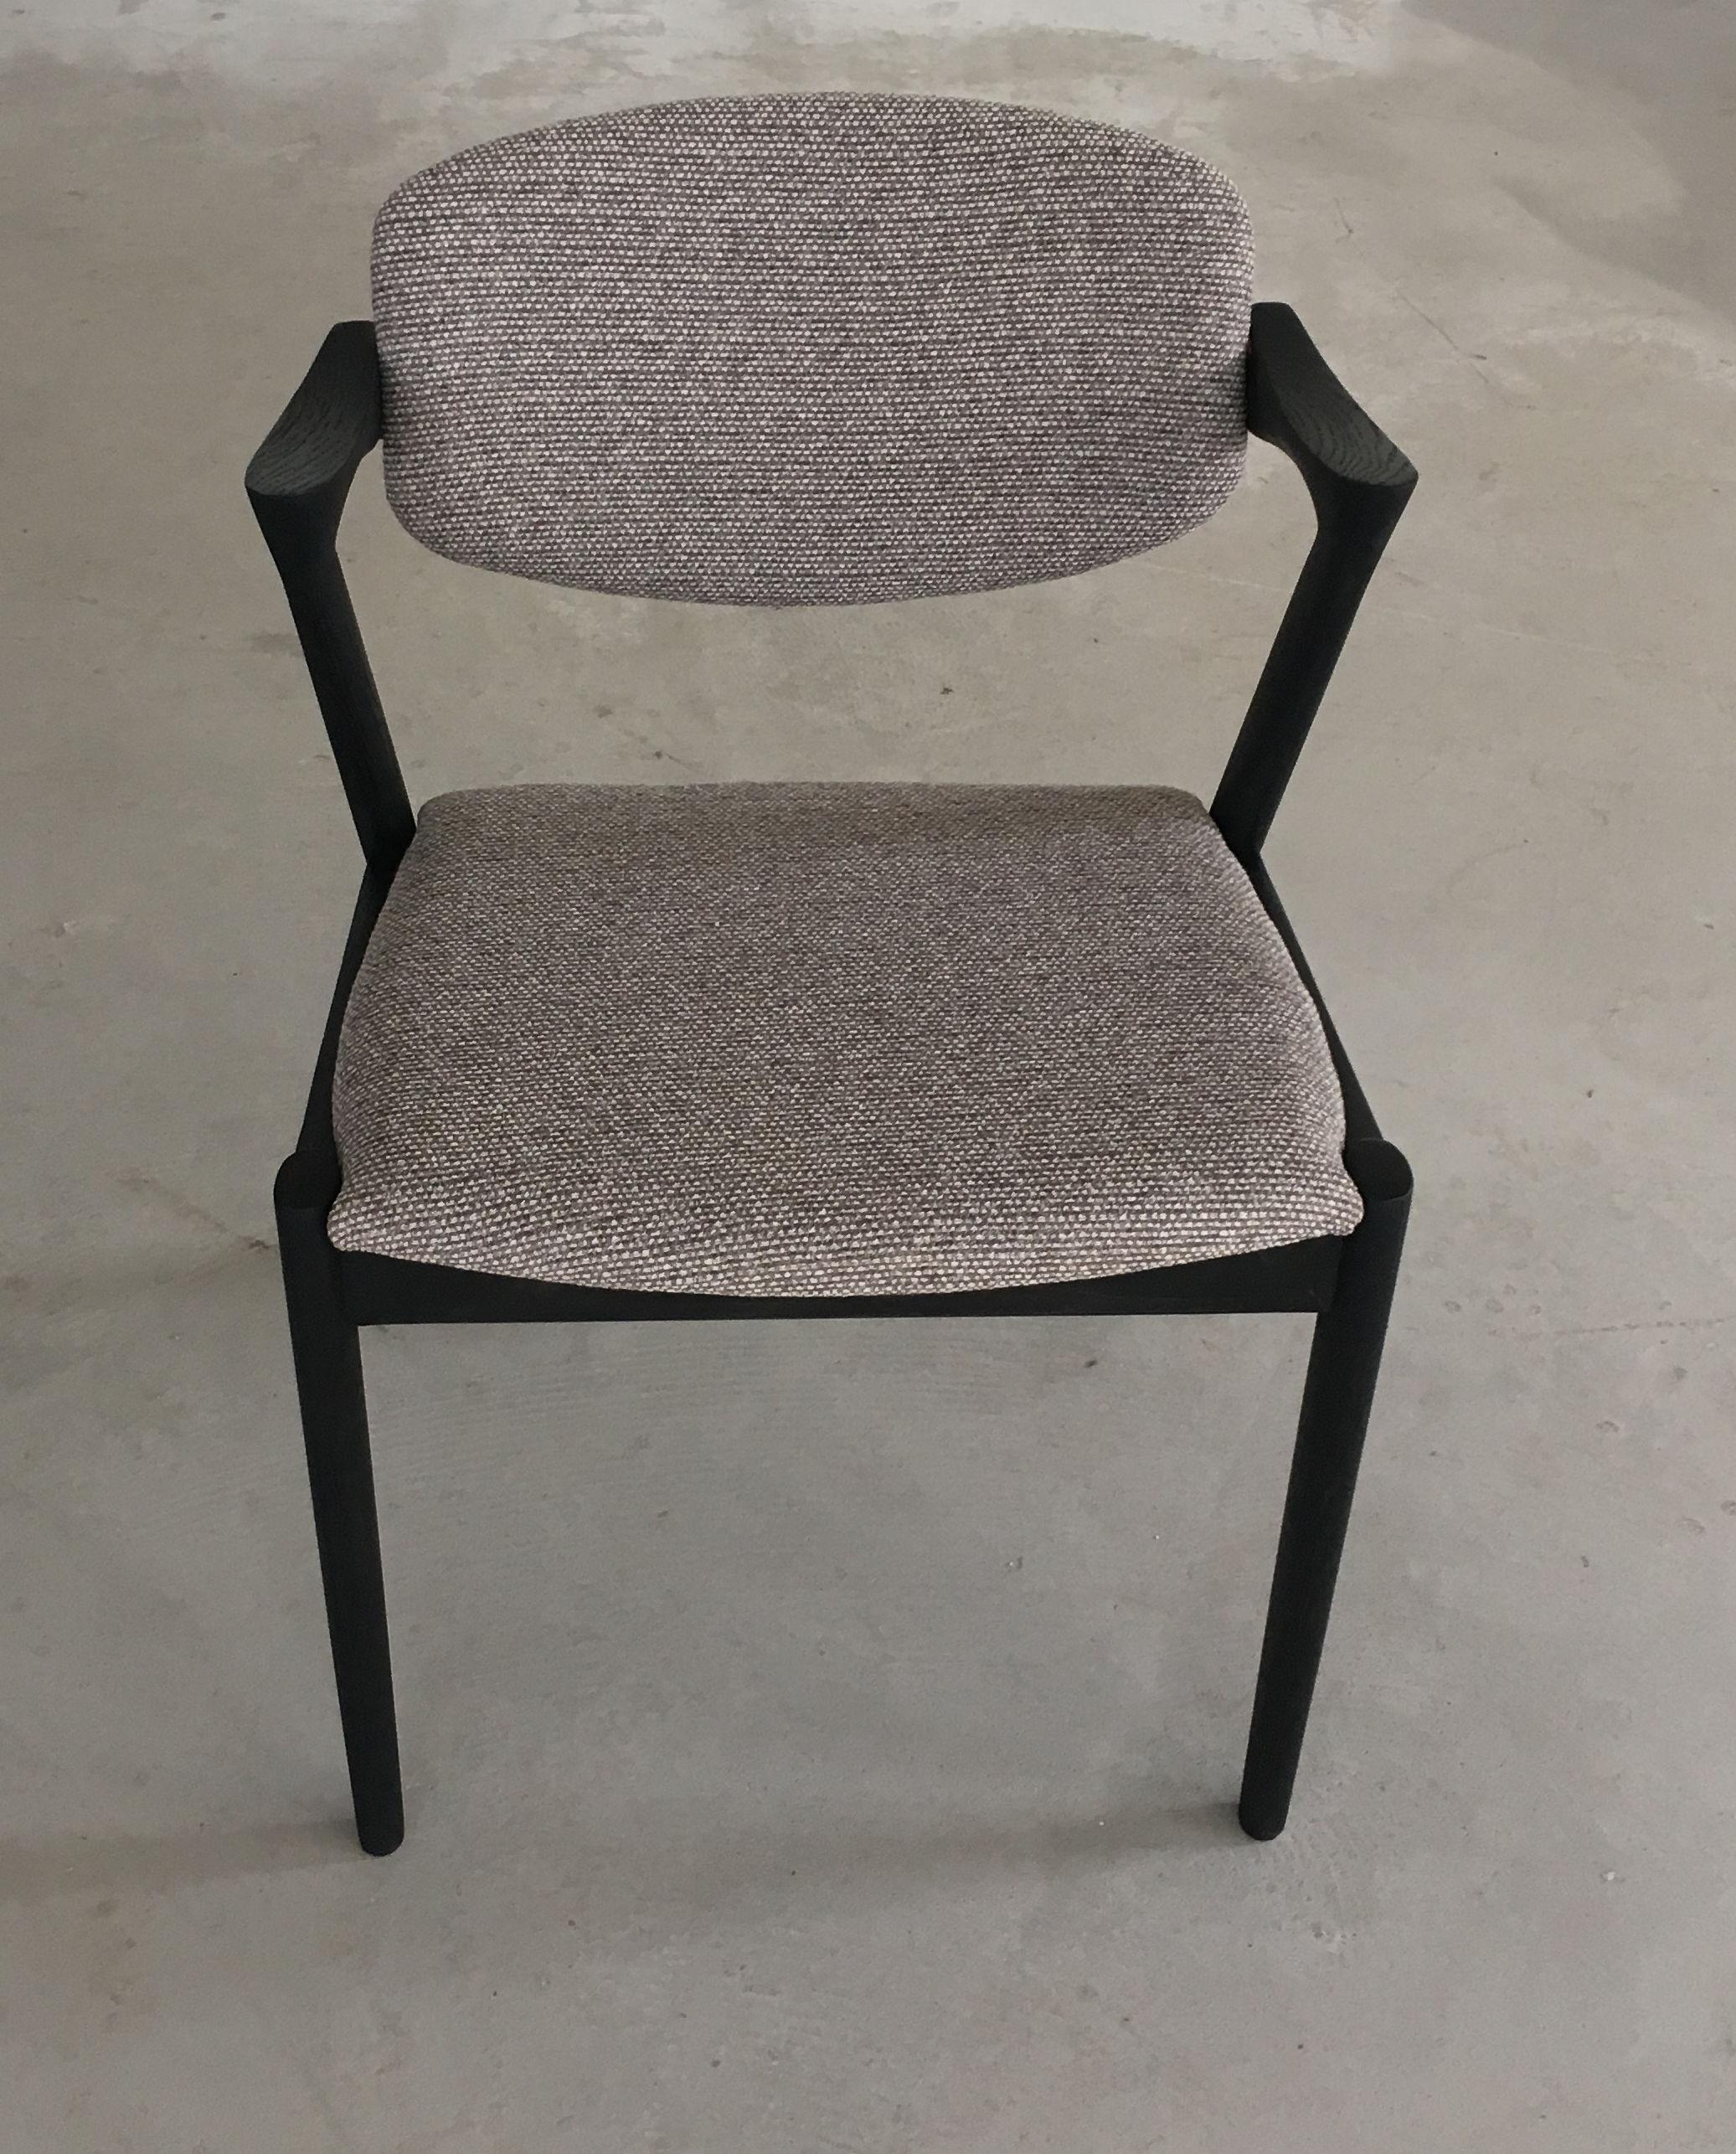 Set of 8 restored and ebonized oak dining chairs, inc. reupholstery with swivel backrest by Kai Kristiansen for Schous Møbelfabrik.

The chairs have Kai Kristiansen’s typical light and elegant design that make them fit in easily where you want them